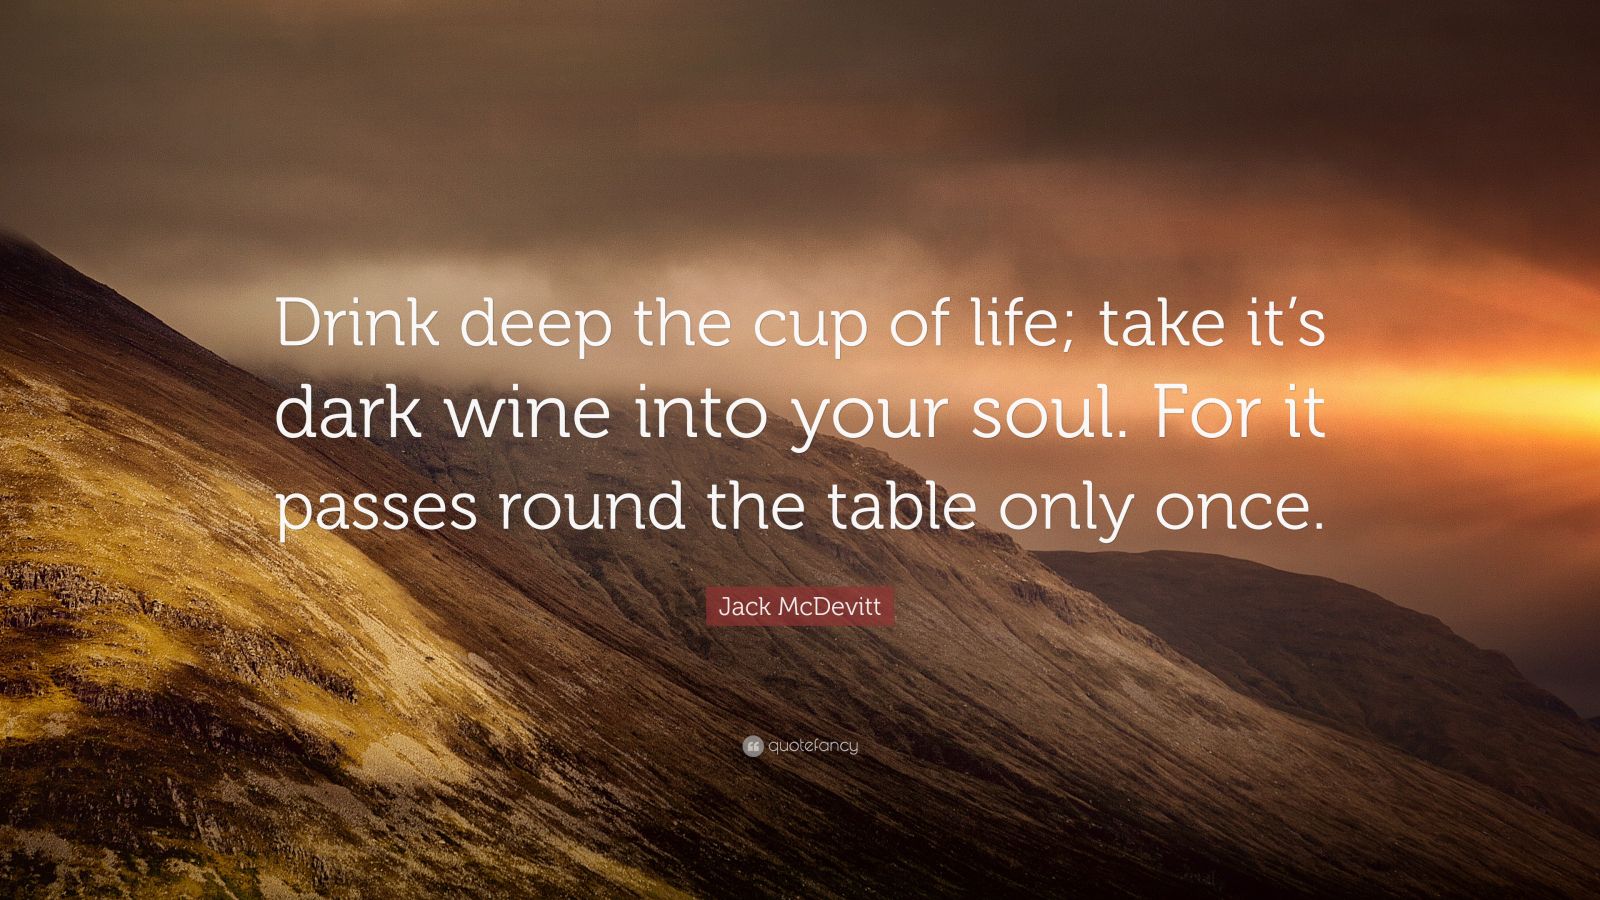 Jack McDevitt Quote: “Drink deep the cup of life; take it's dark wine into  your soul. For it passes round the table only once.”